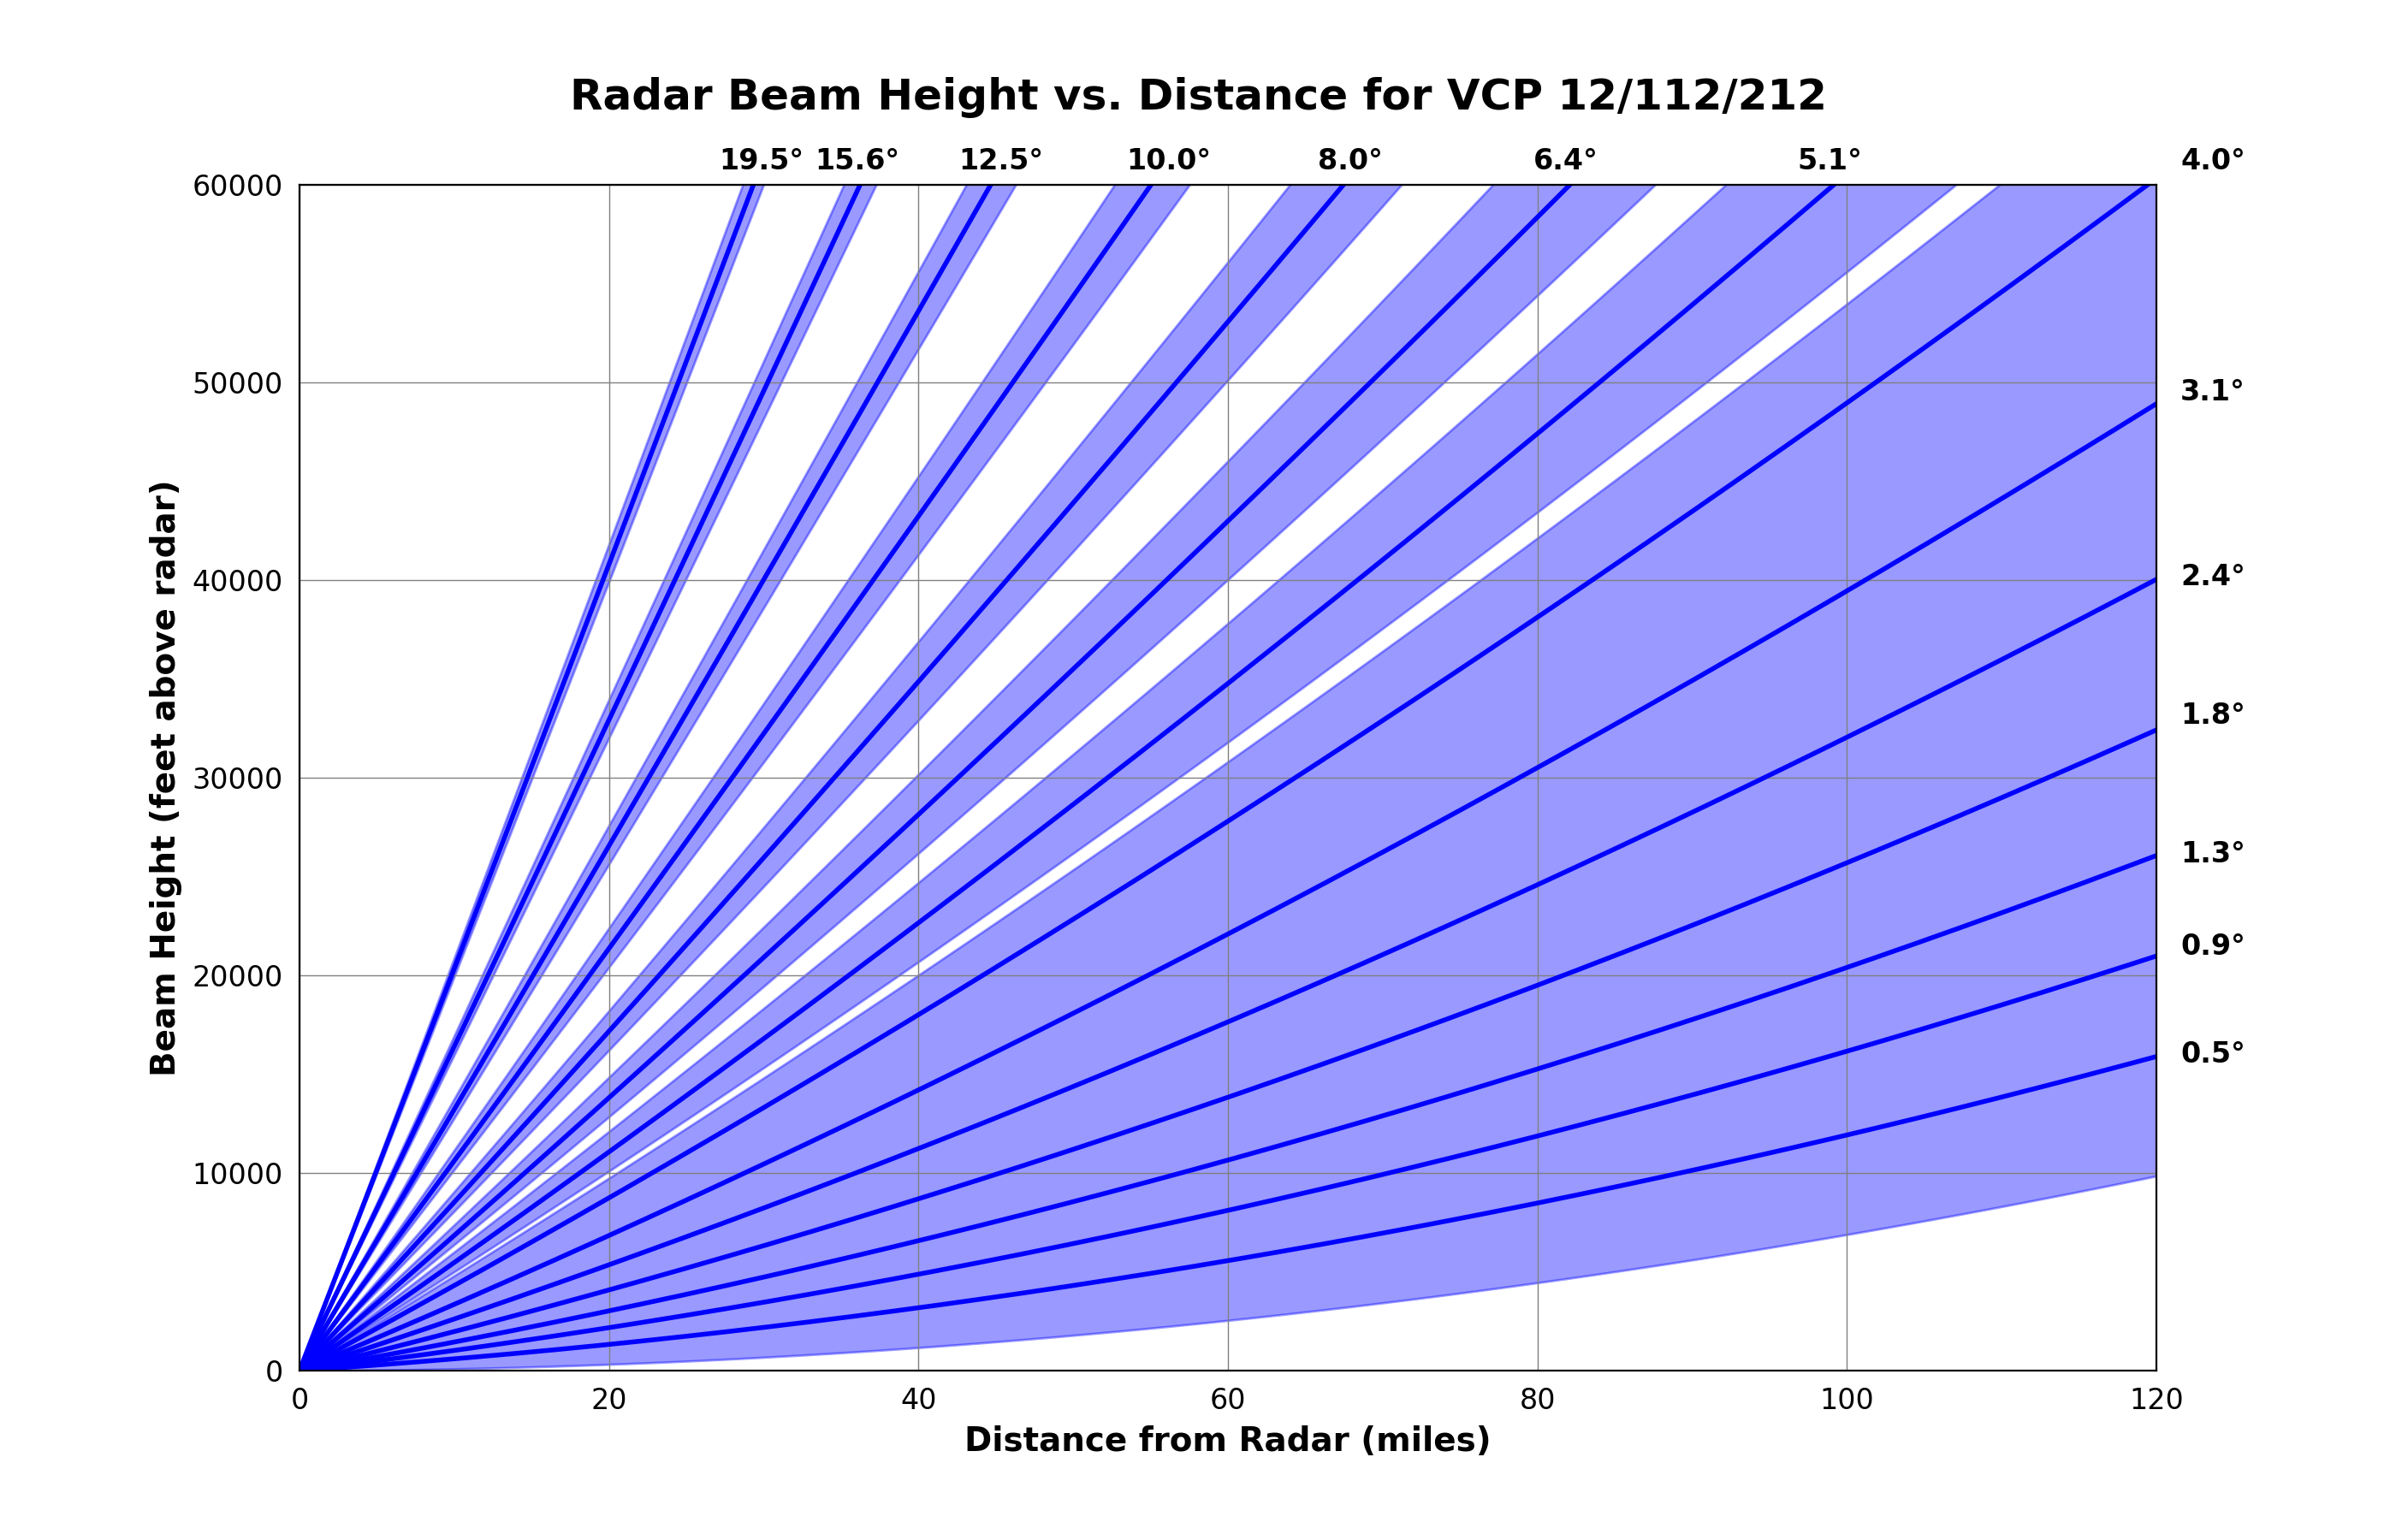 VCPs 12, 112, and 212 all scan the same elevation angles. 